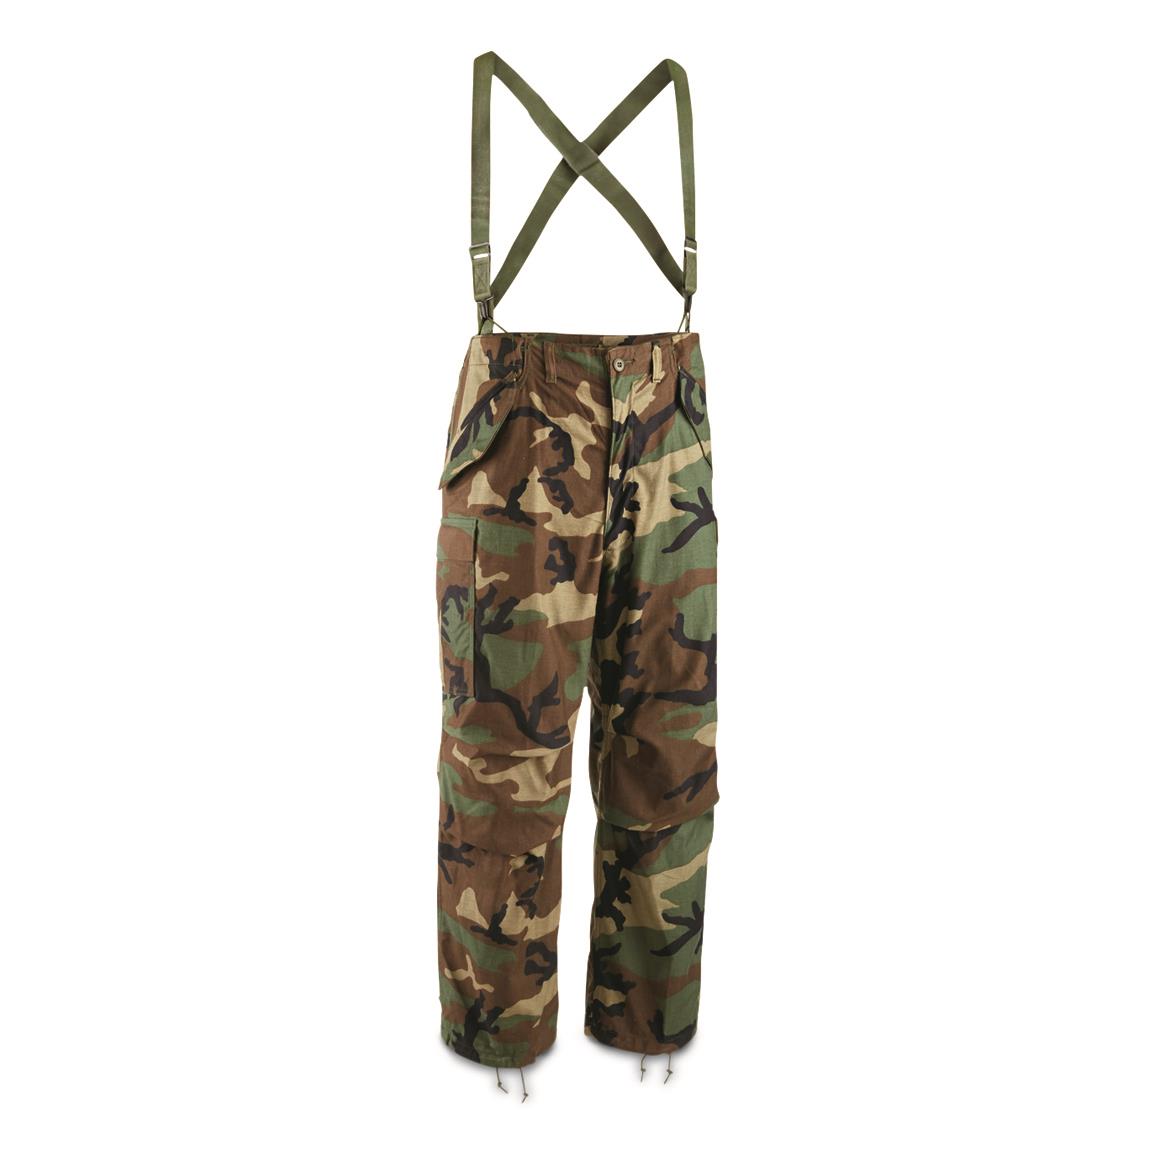 U.S. Military Surplus M65 Field Pants with Liner and Suspenders, New